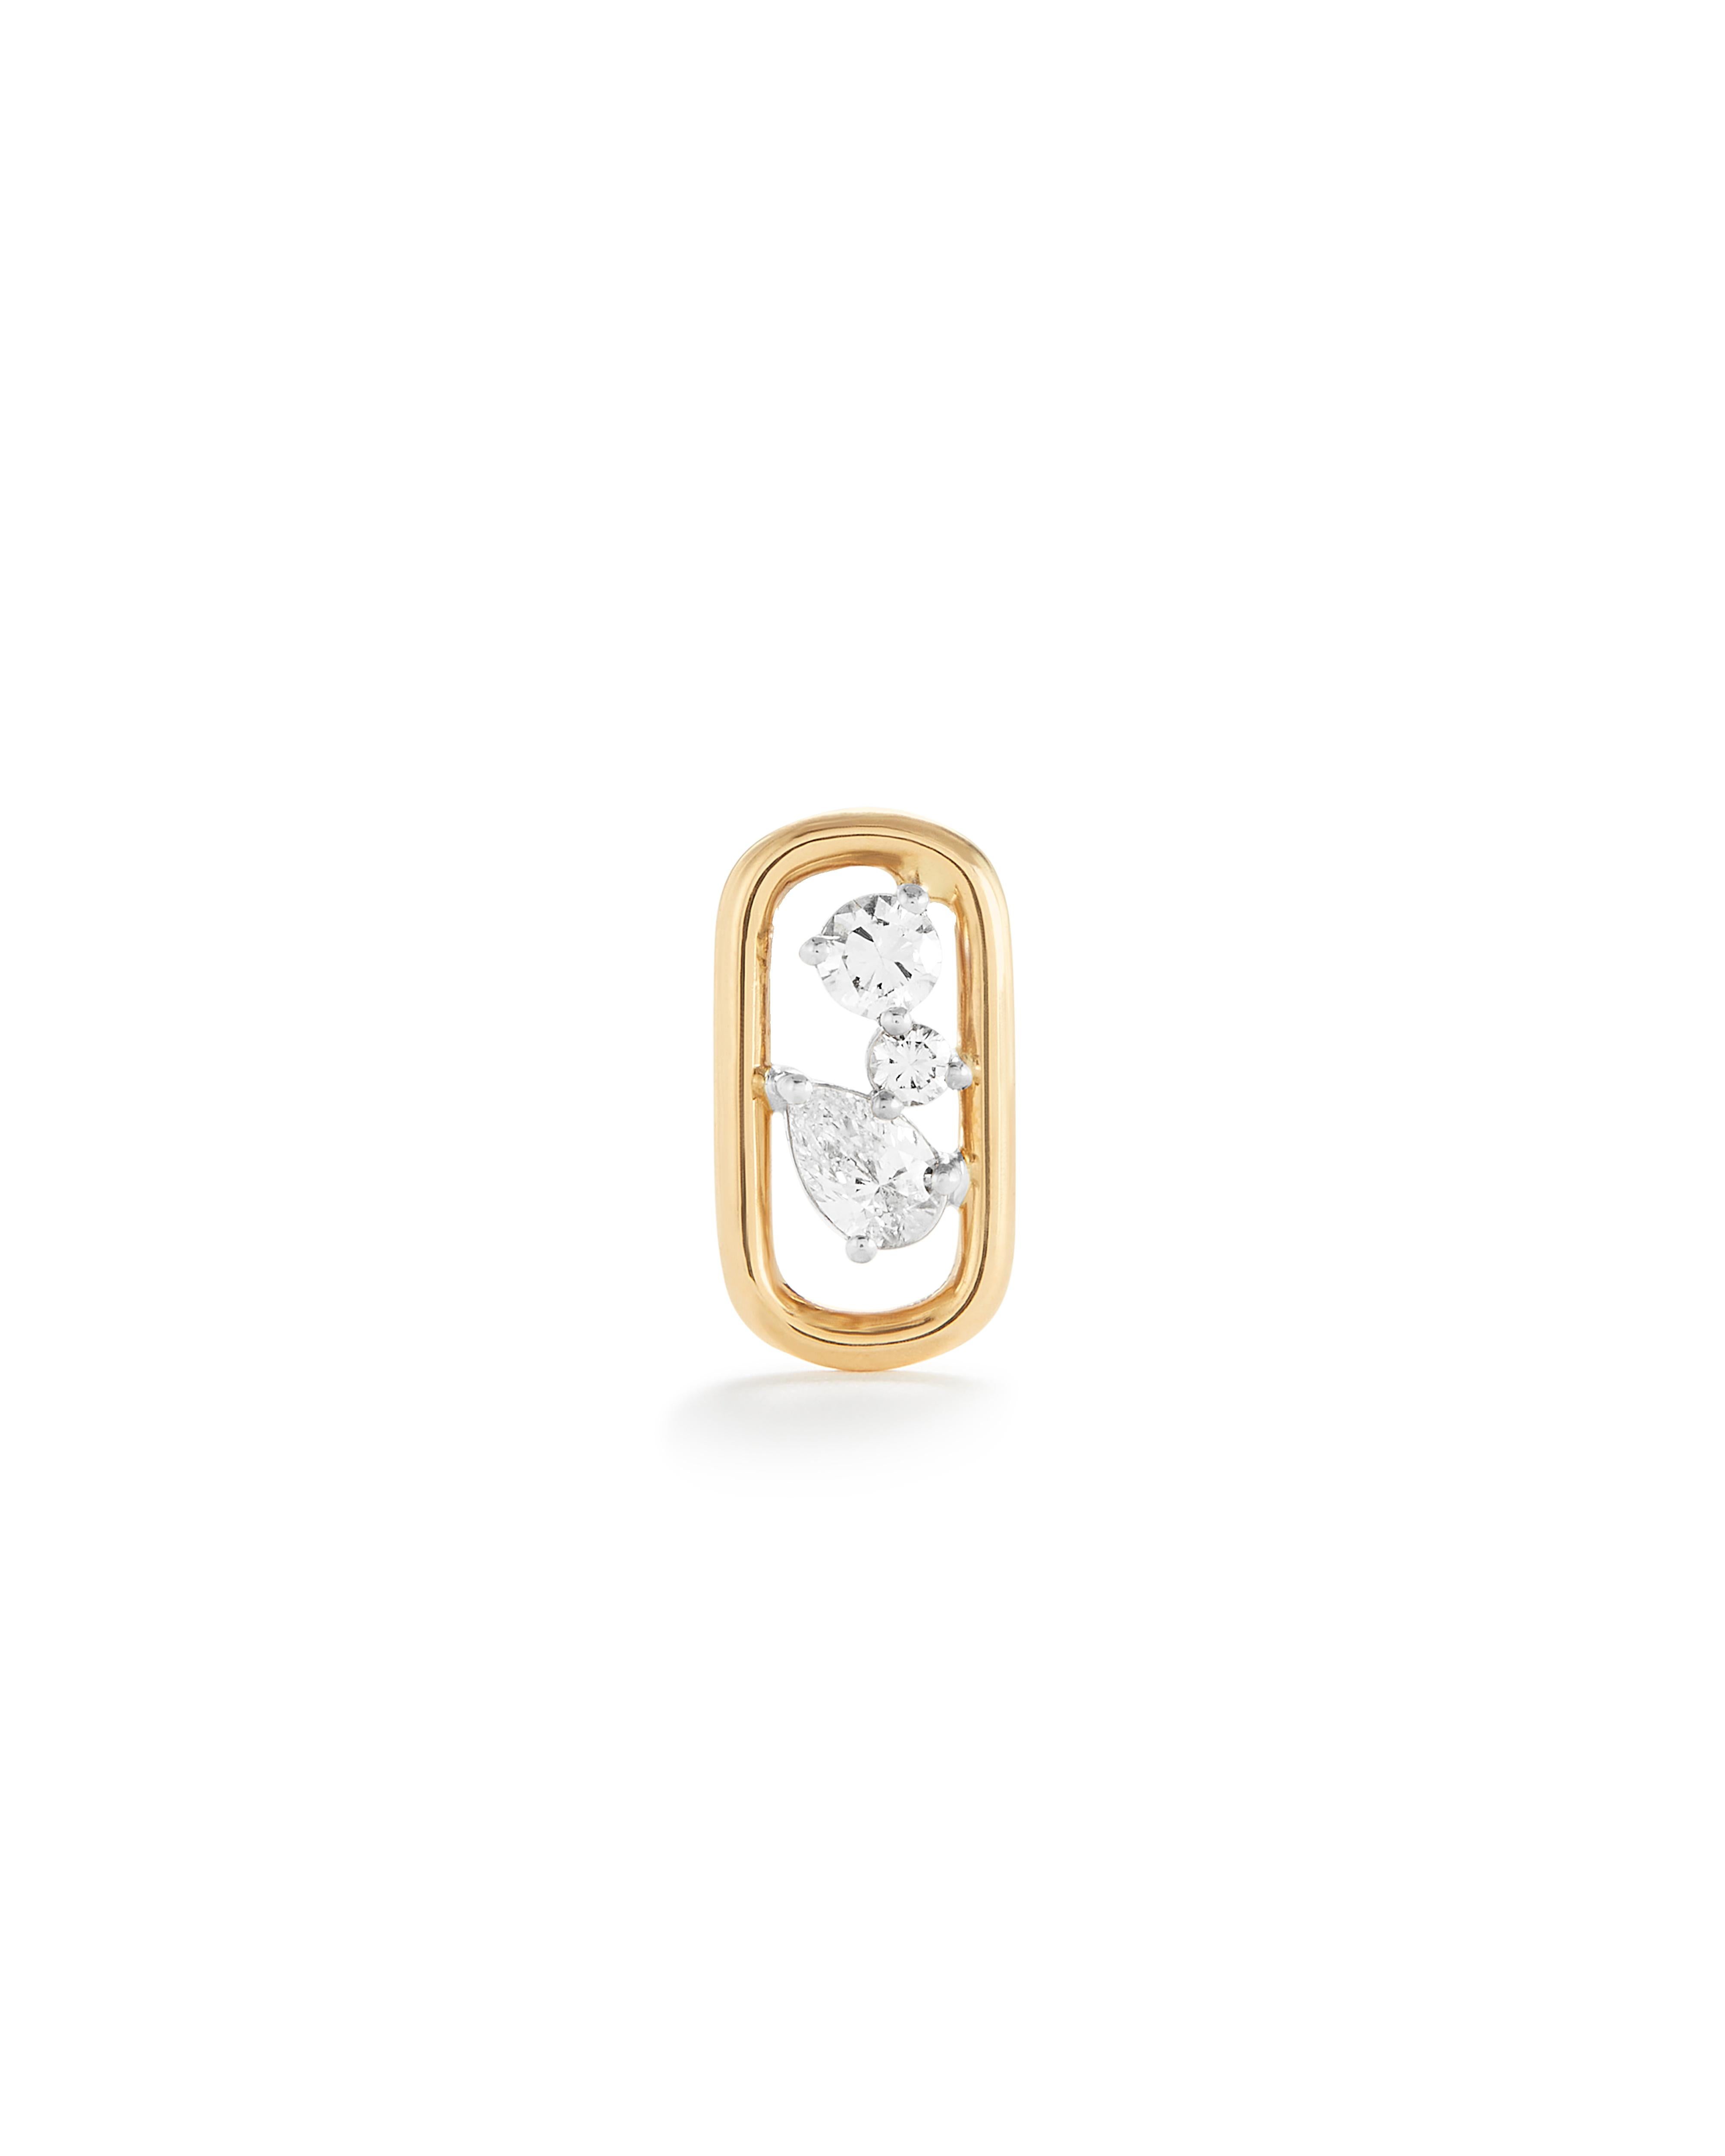 A unique stud earring that will bring coolness to your ear game! It is meticulously handcrafted in 18K solid gold with varying sized pear shaped and round brilliant natural diamonds set in platinum. 

The Mara Collection was built around the beauty